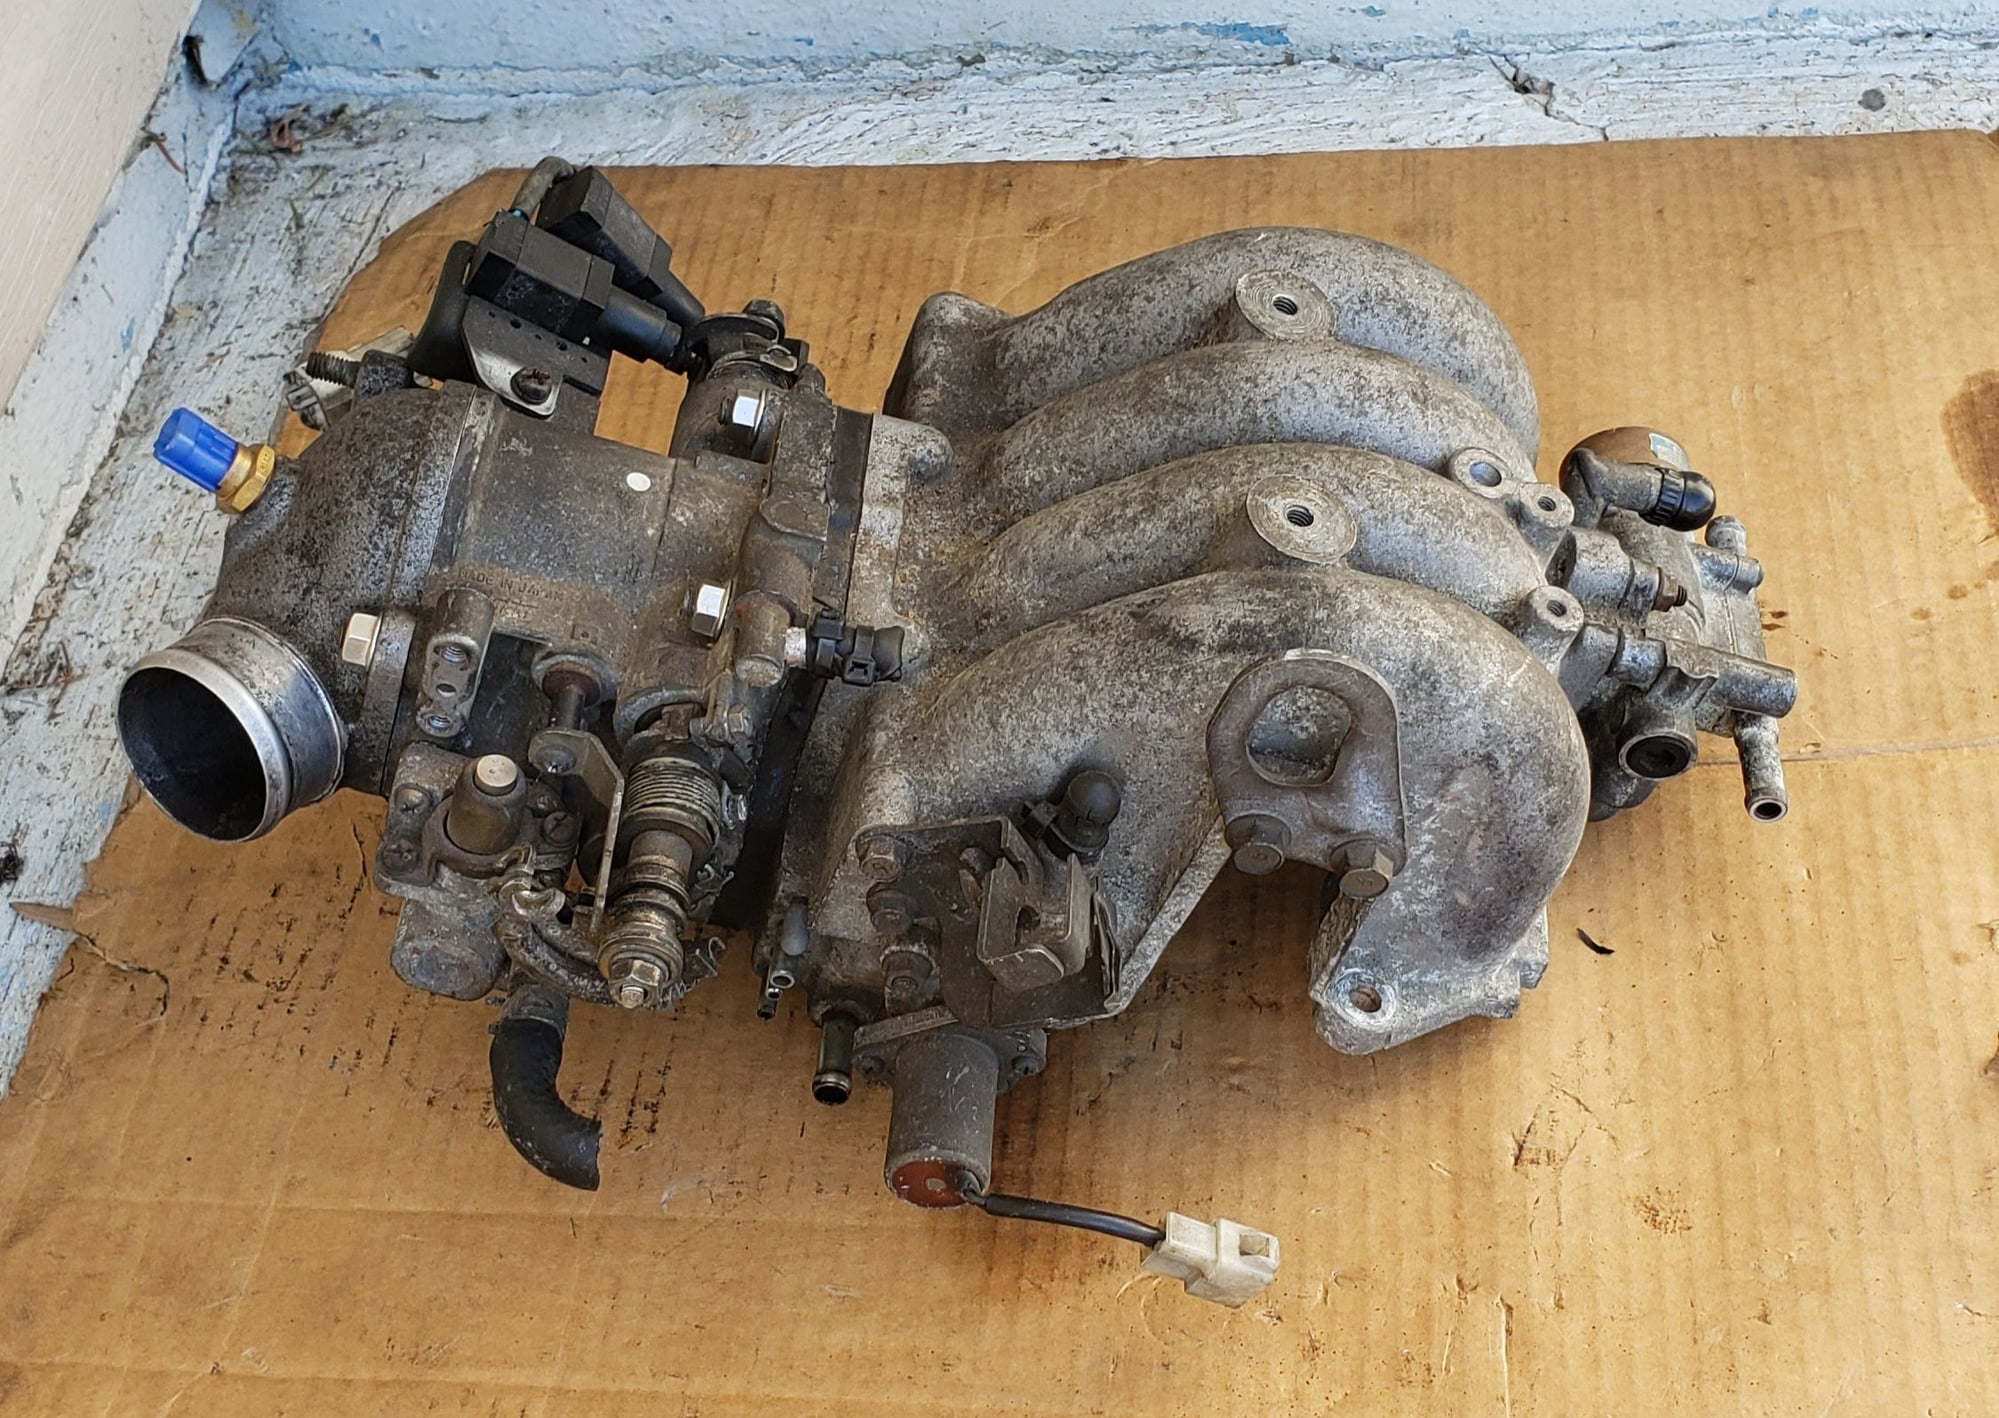 Engine - Intake/Fuel - 1989 fc t2 upper intake manifold with throttle body - Used - 0  All Models - Edison, NJ 08817, United States